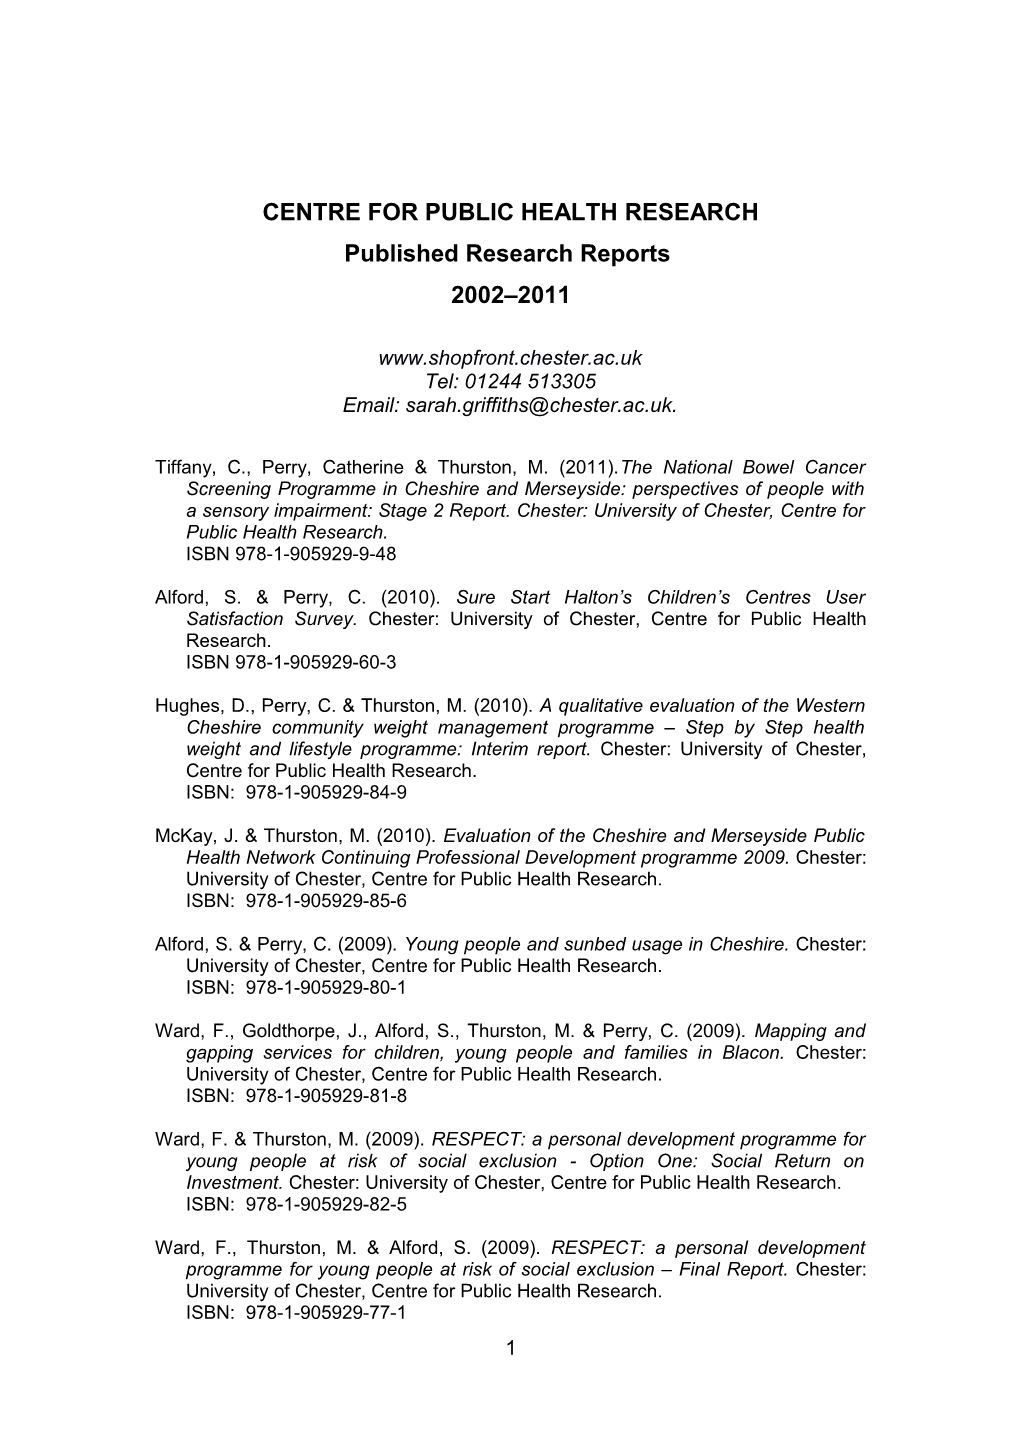 Summaries of Published Reports